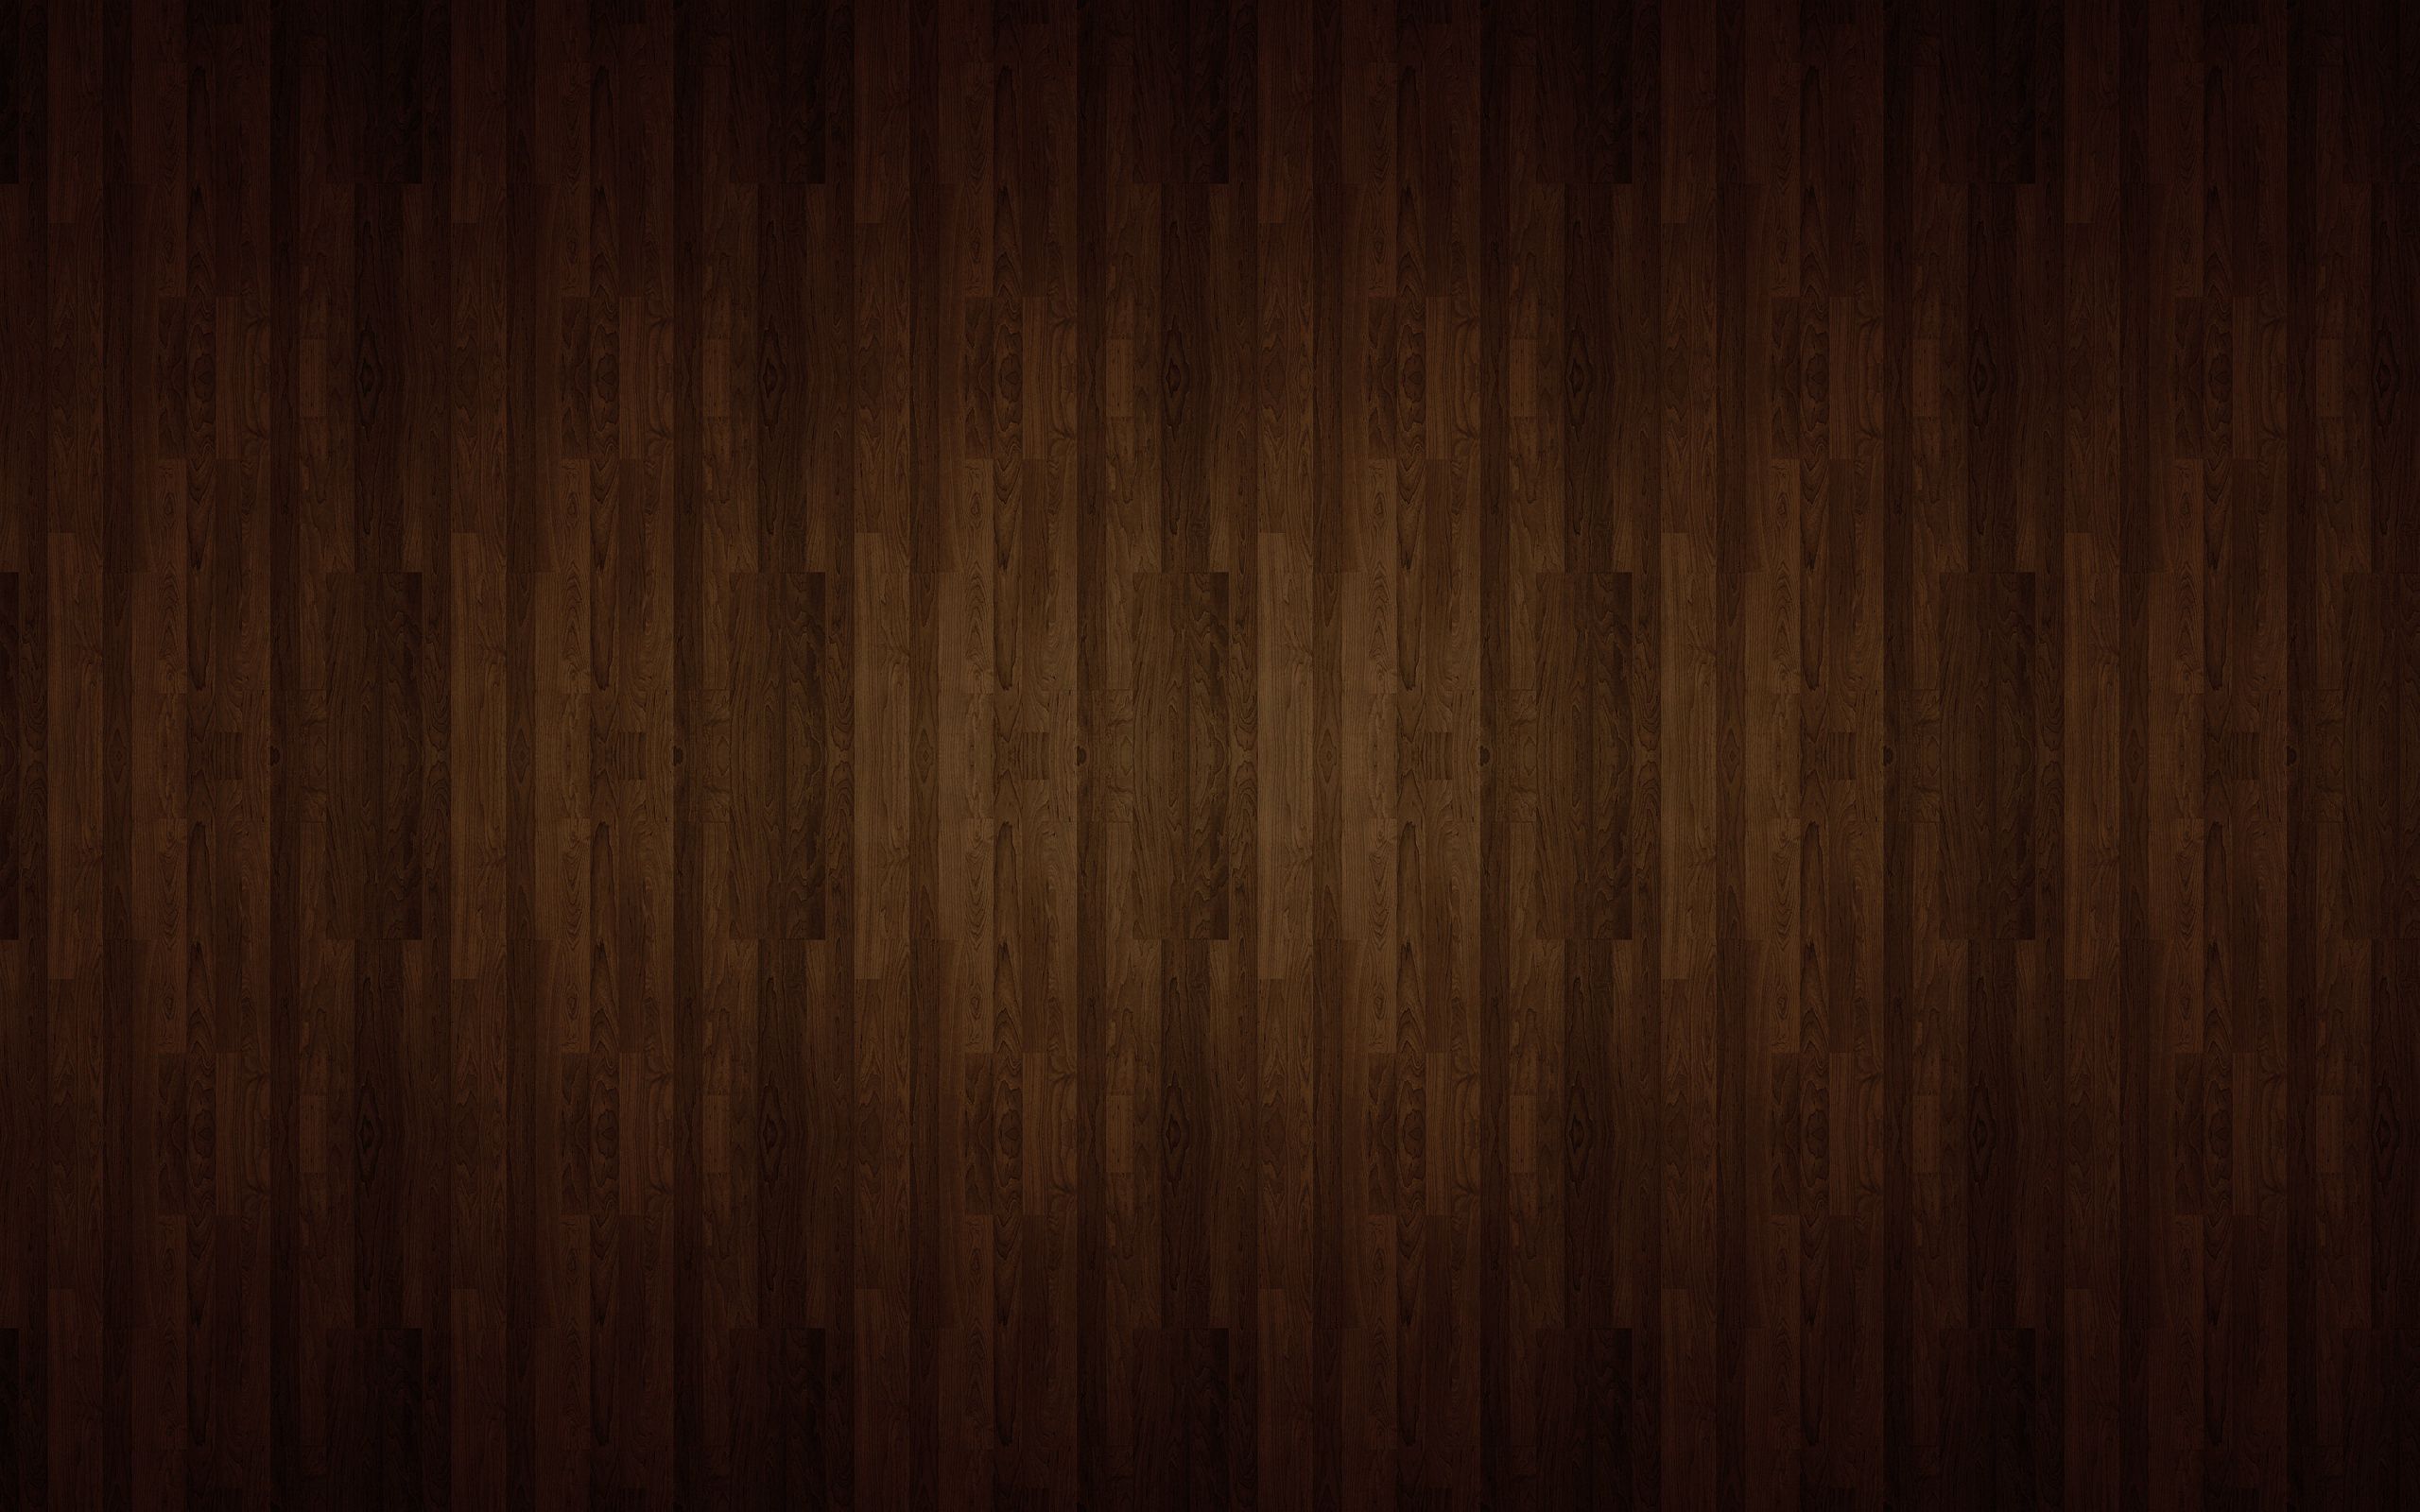 planks, textures, surface, wood, tree, texture, board, parquet